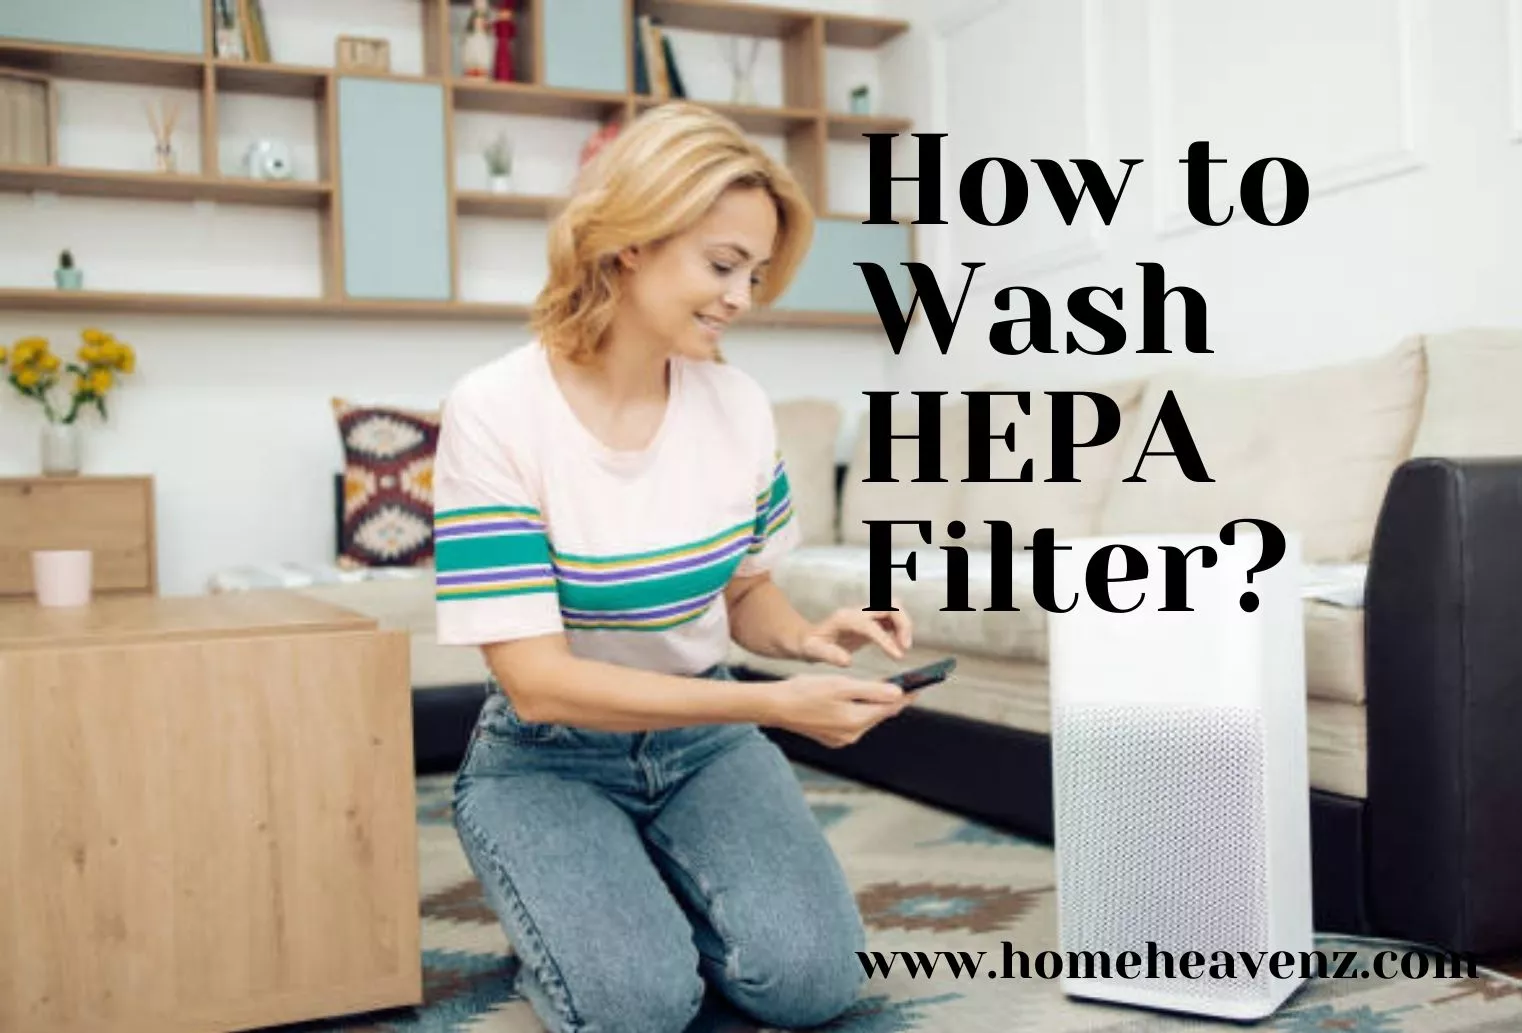 How to Wash HEPA Filter